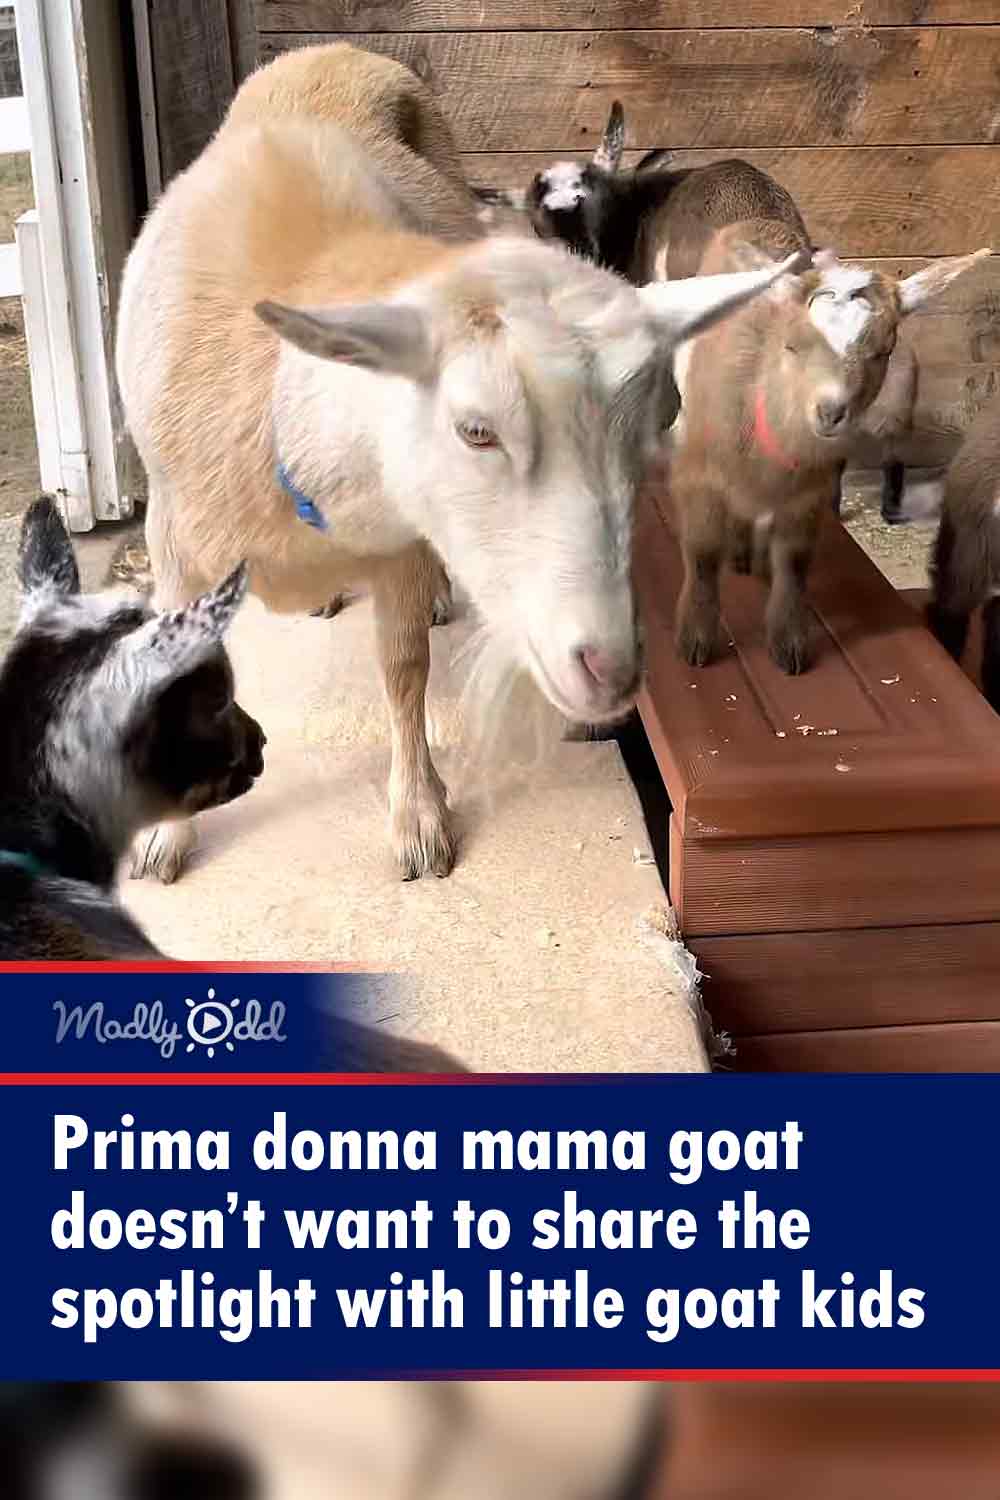 Prima donna mama goat doesn’t want to share the spotlight with little goat kids